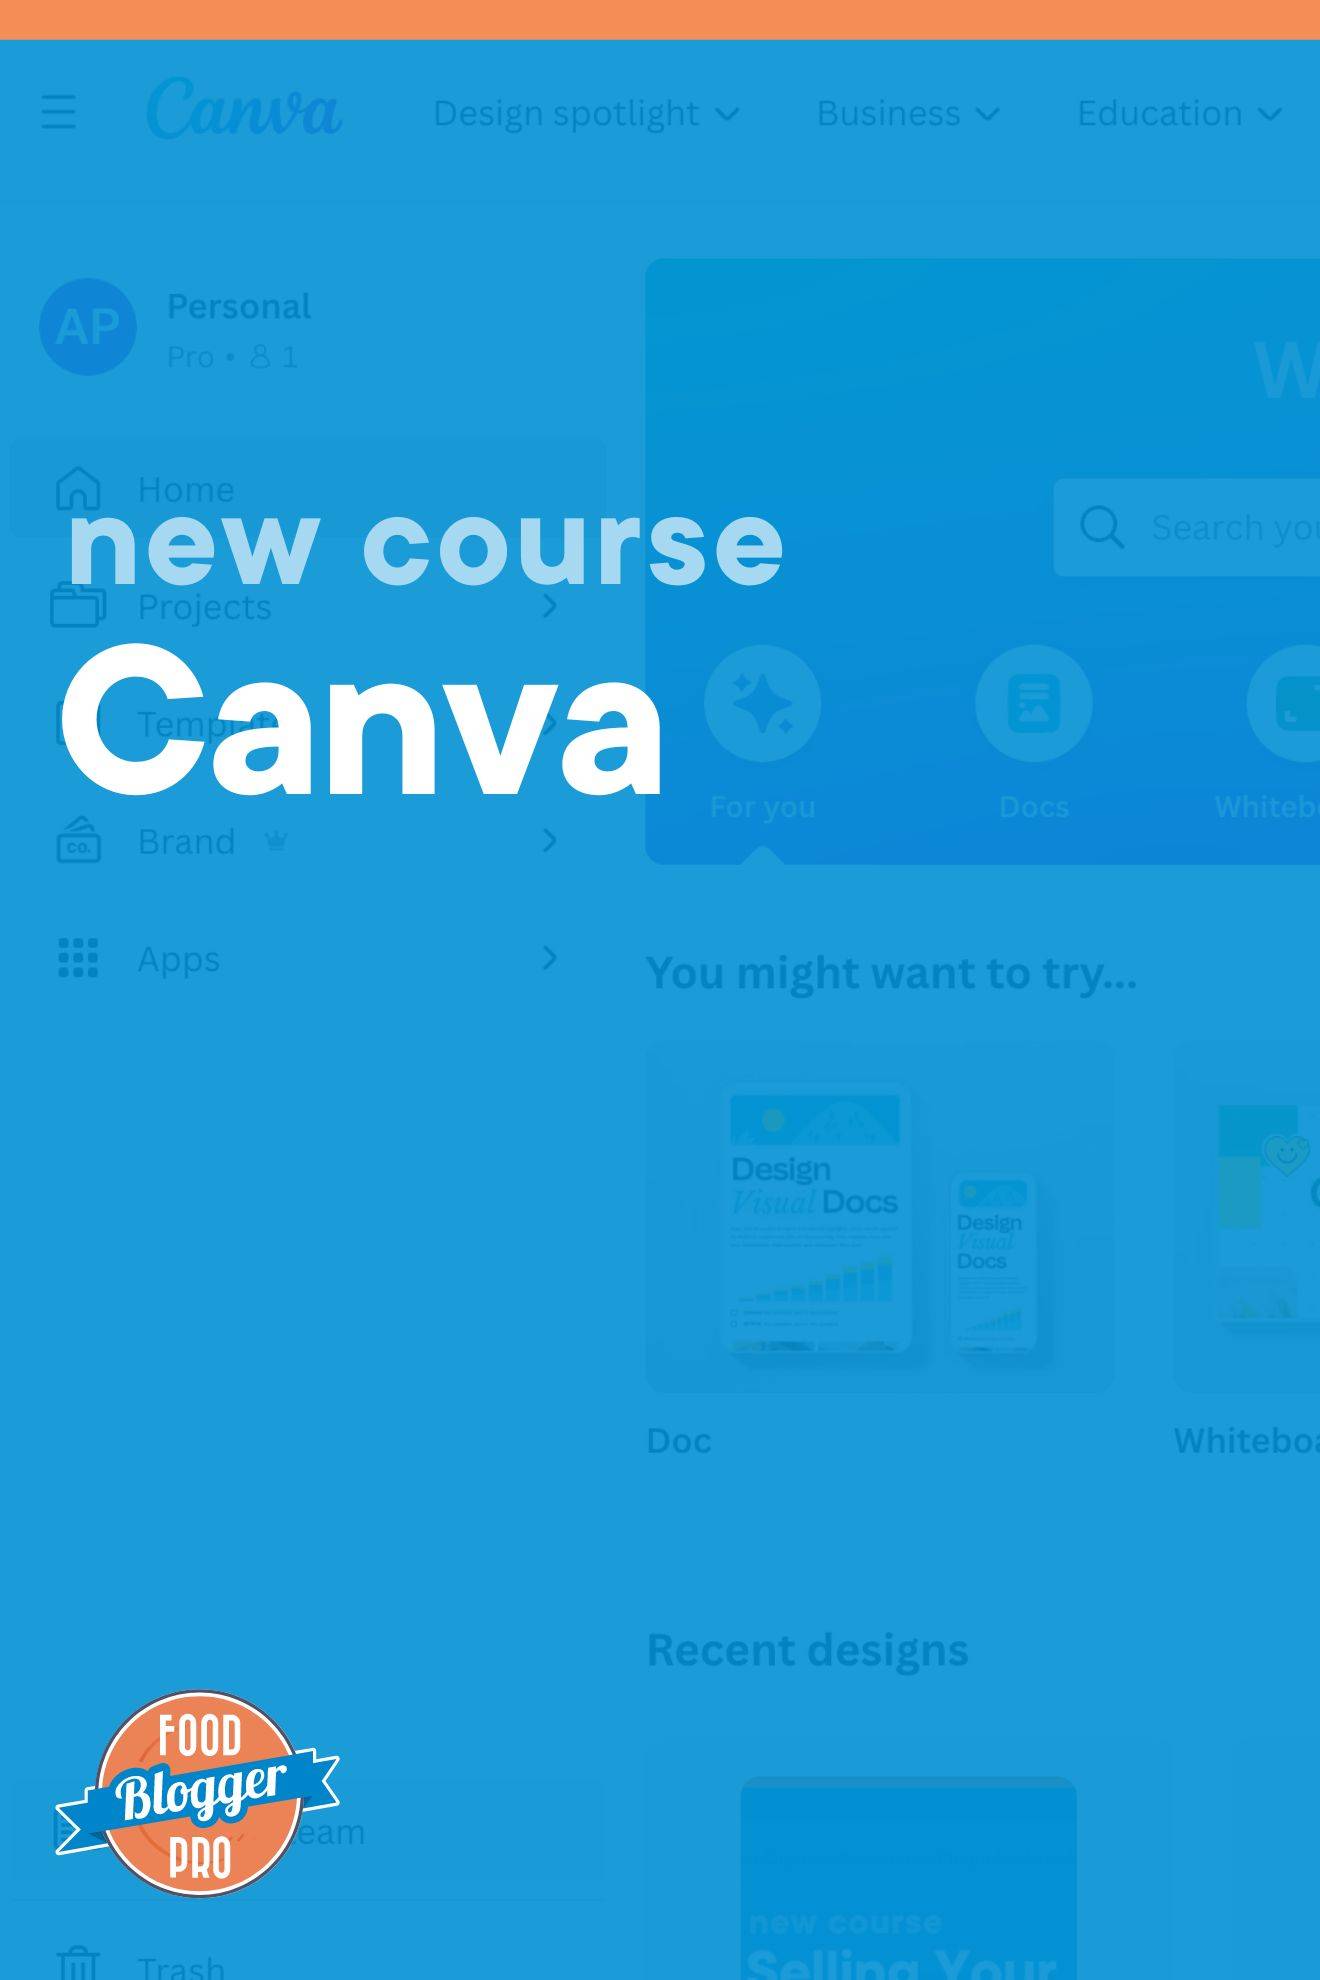 New course on Canva